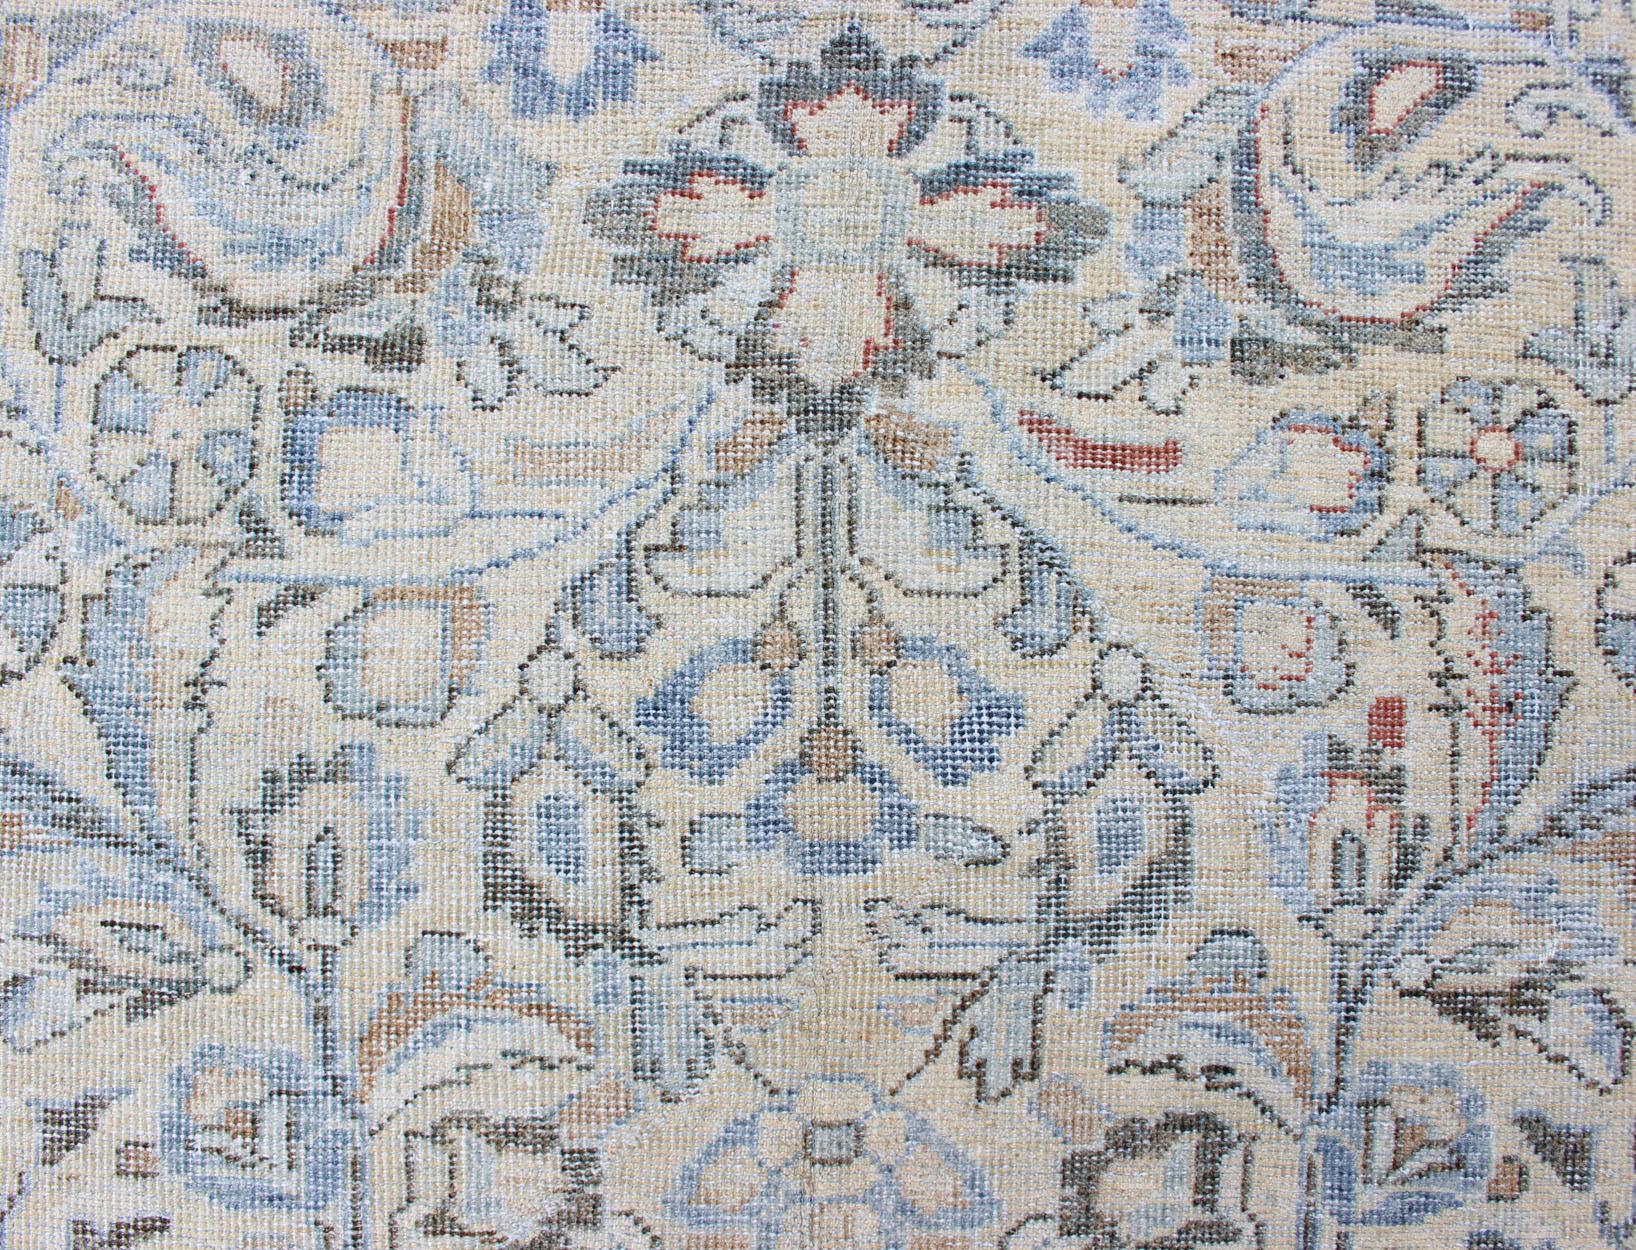 Antique Persian Mahal Rug with Sub Floral Design in Blue, Charcoal & Cream 7